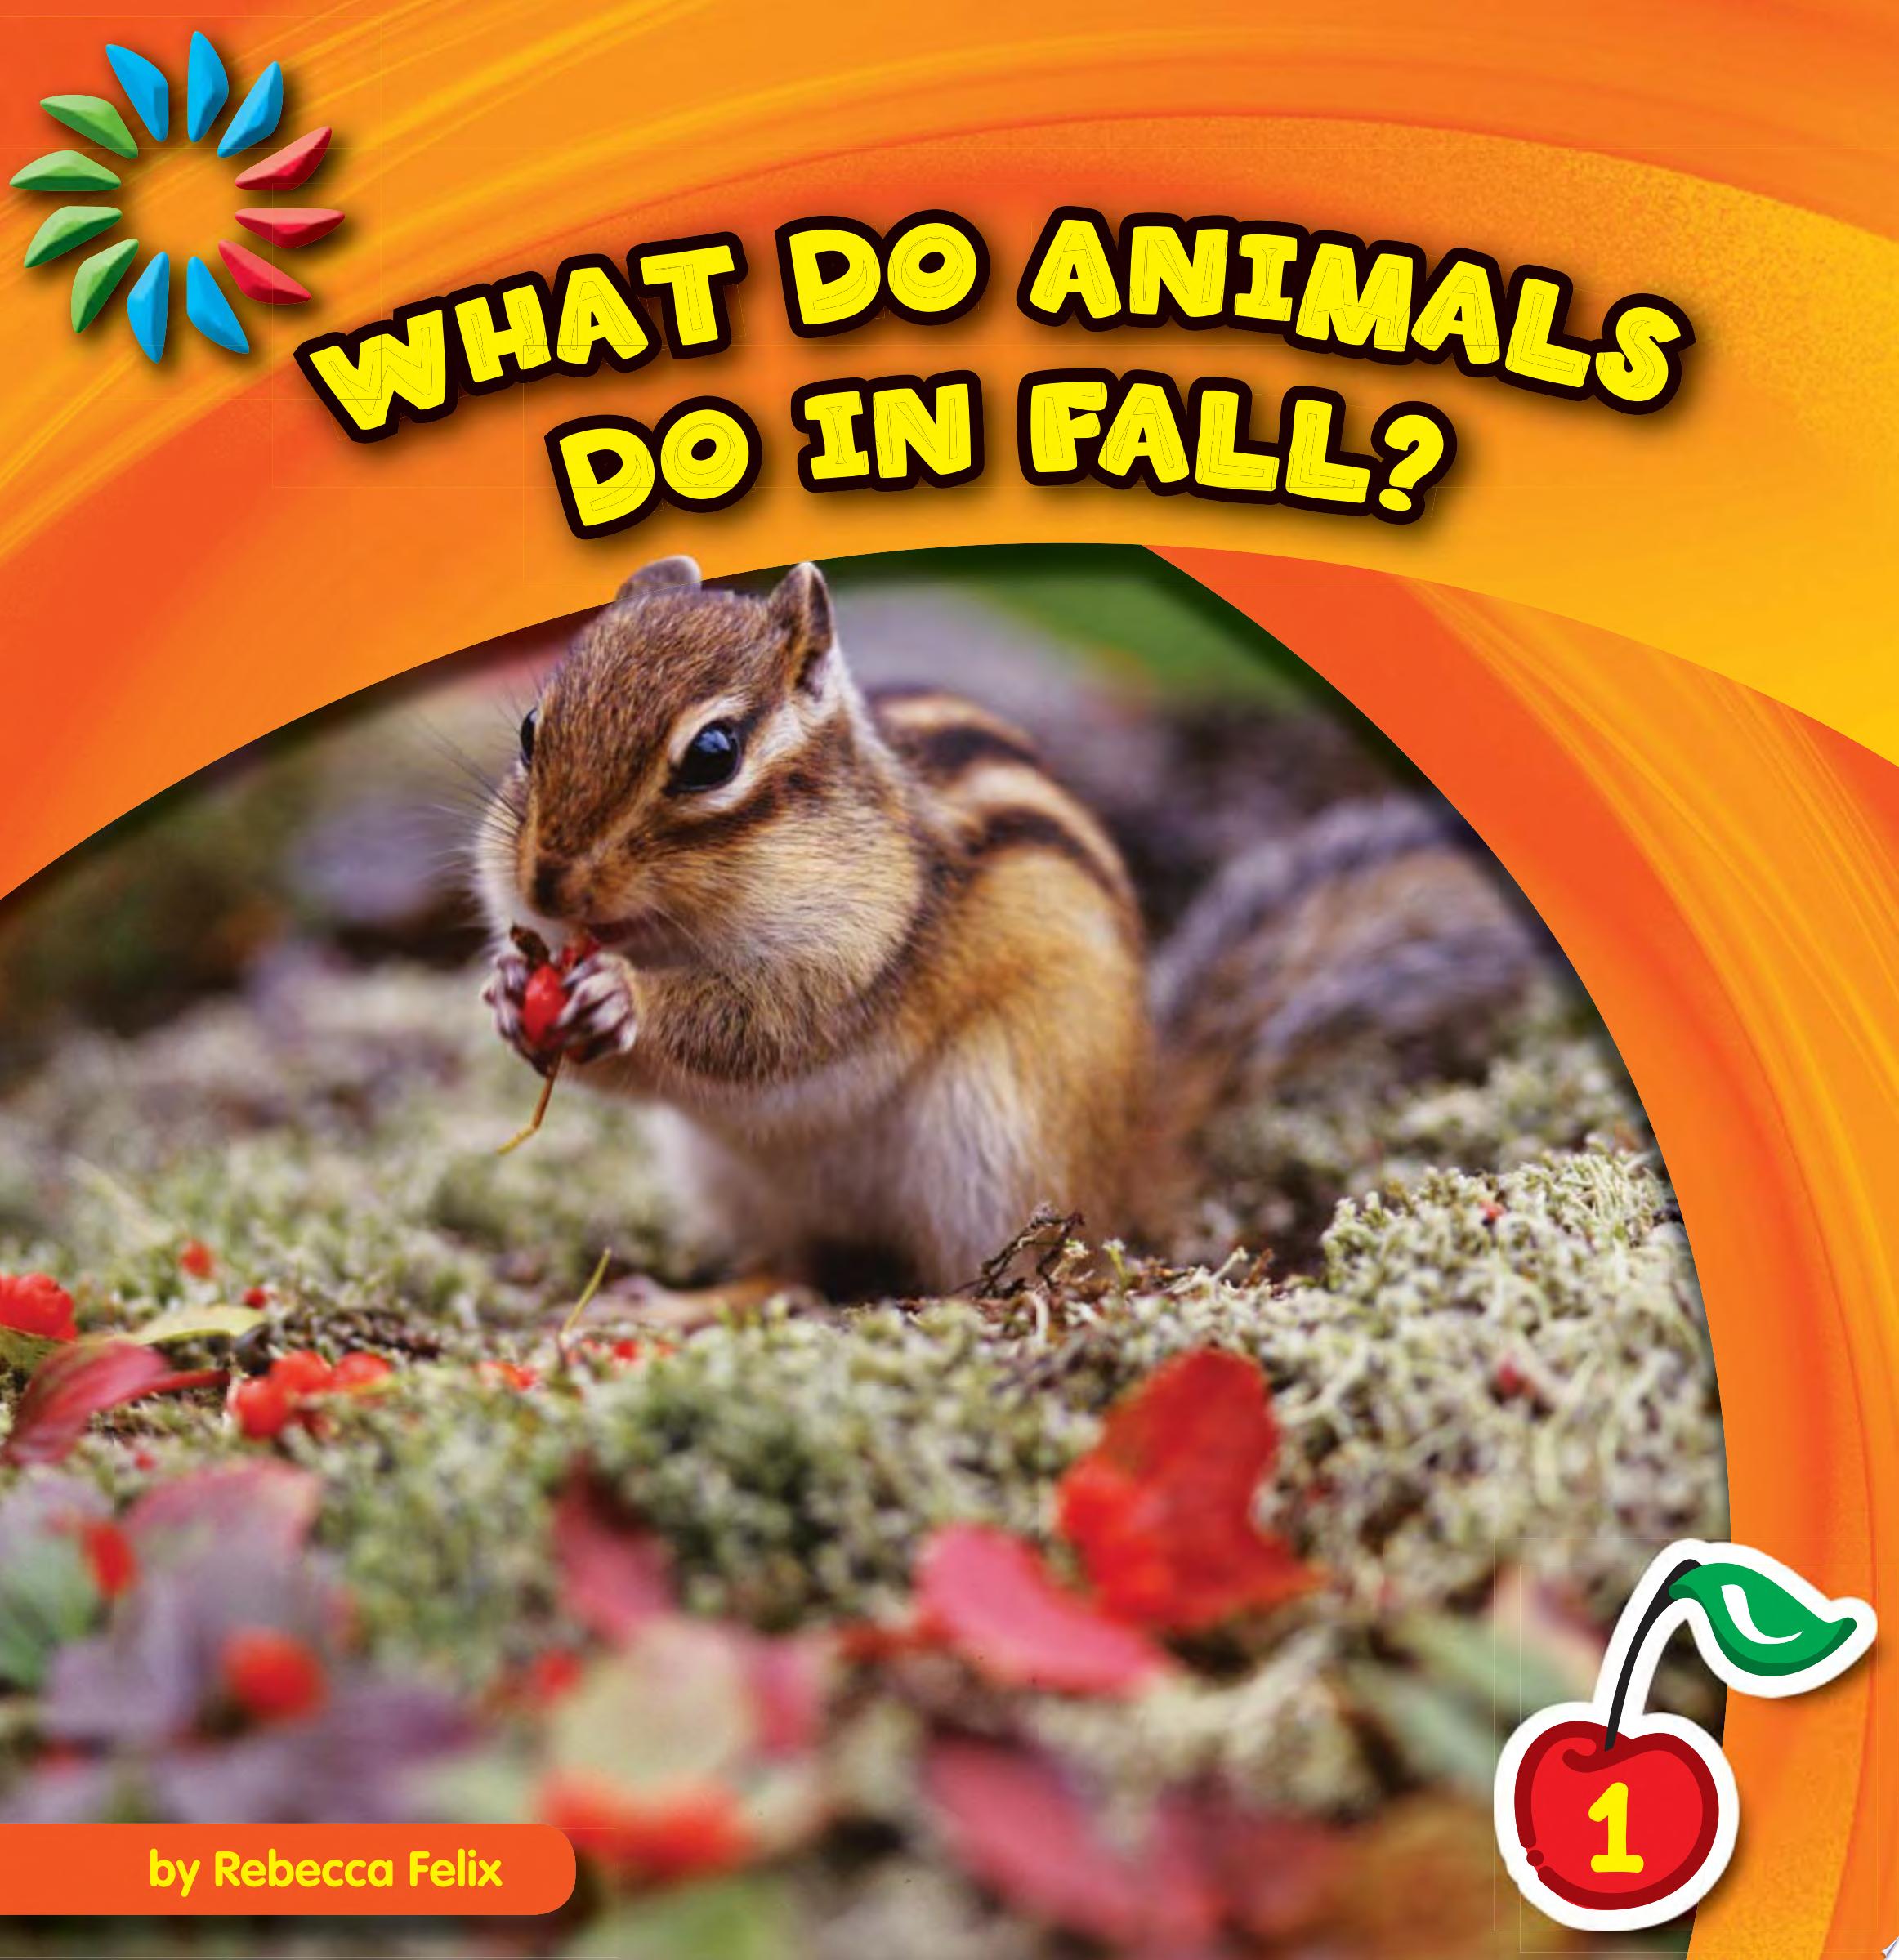 Image for "What Do Animals Do in Fall?"